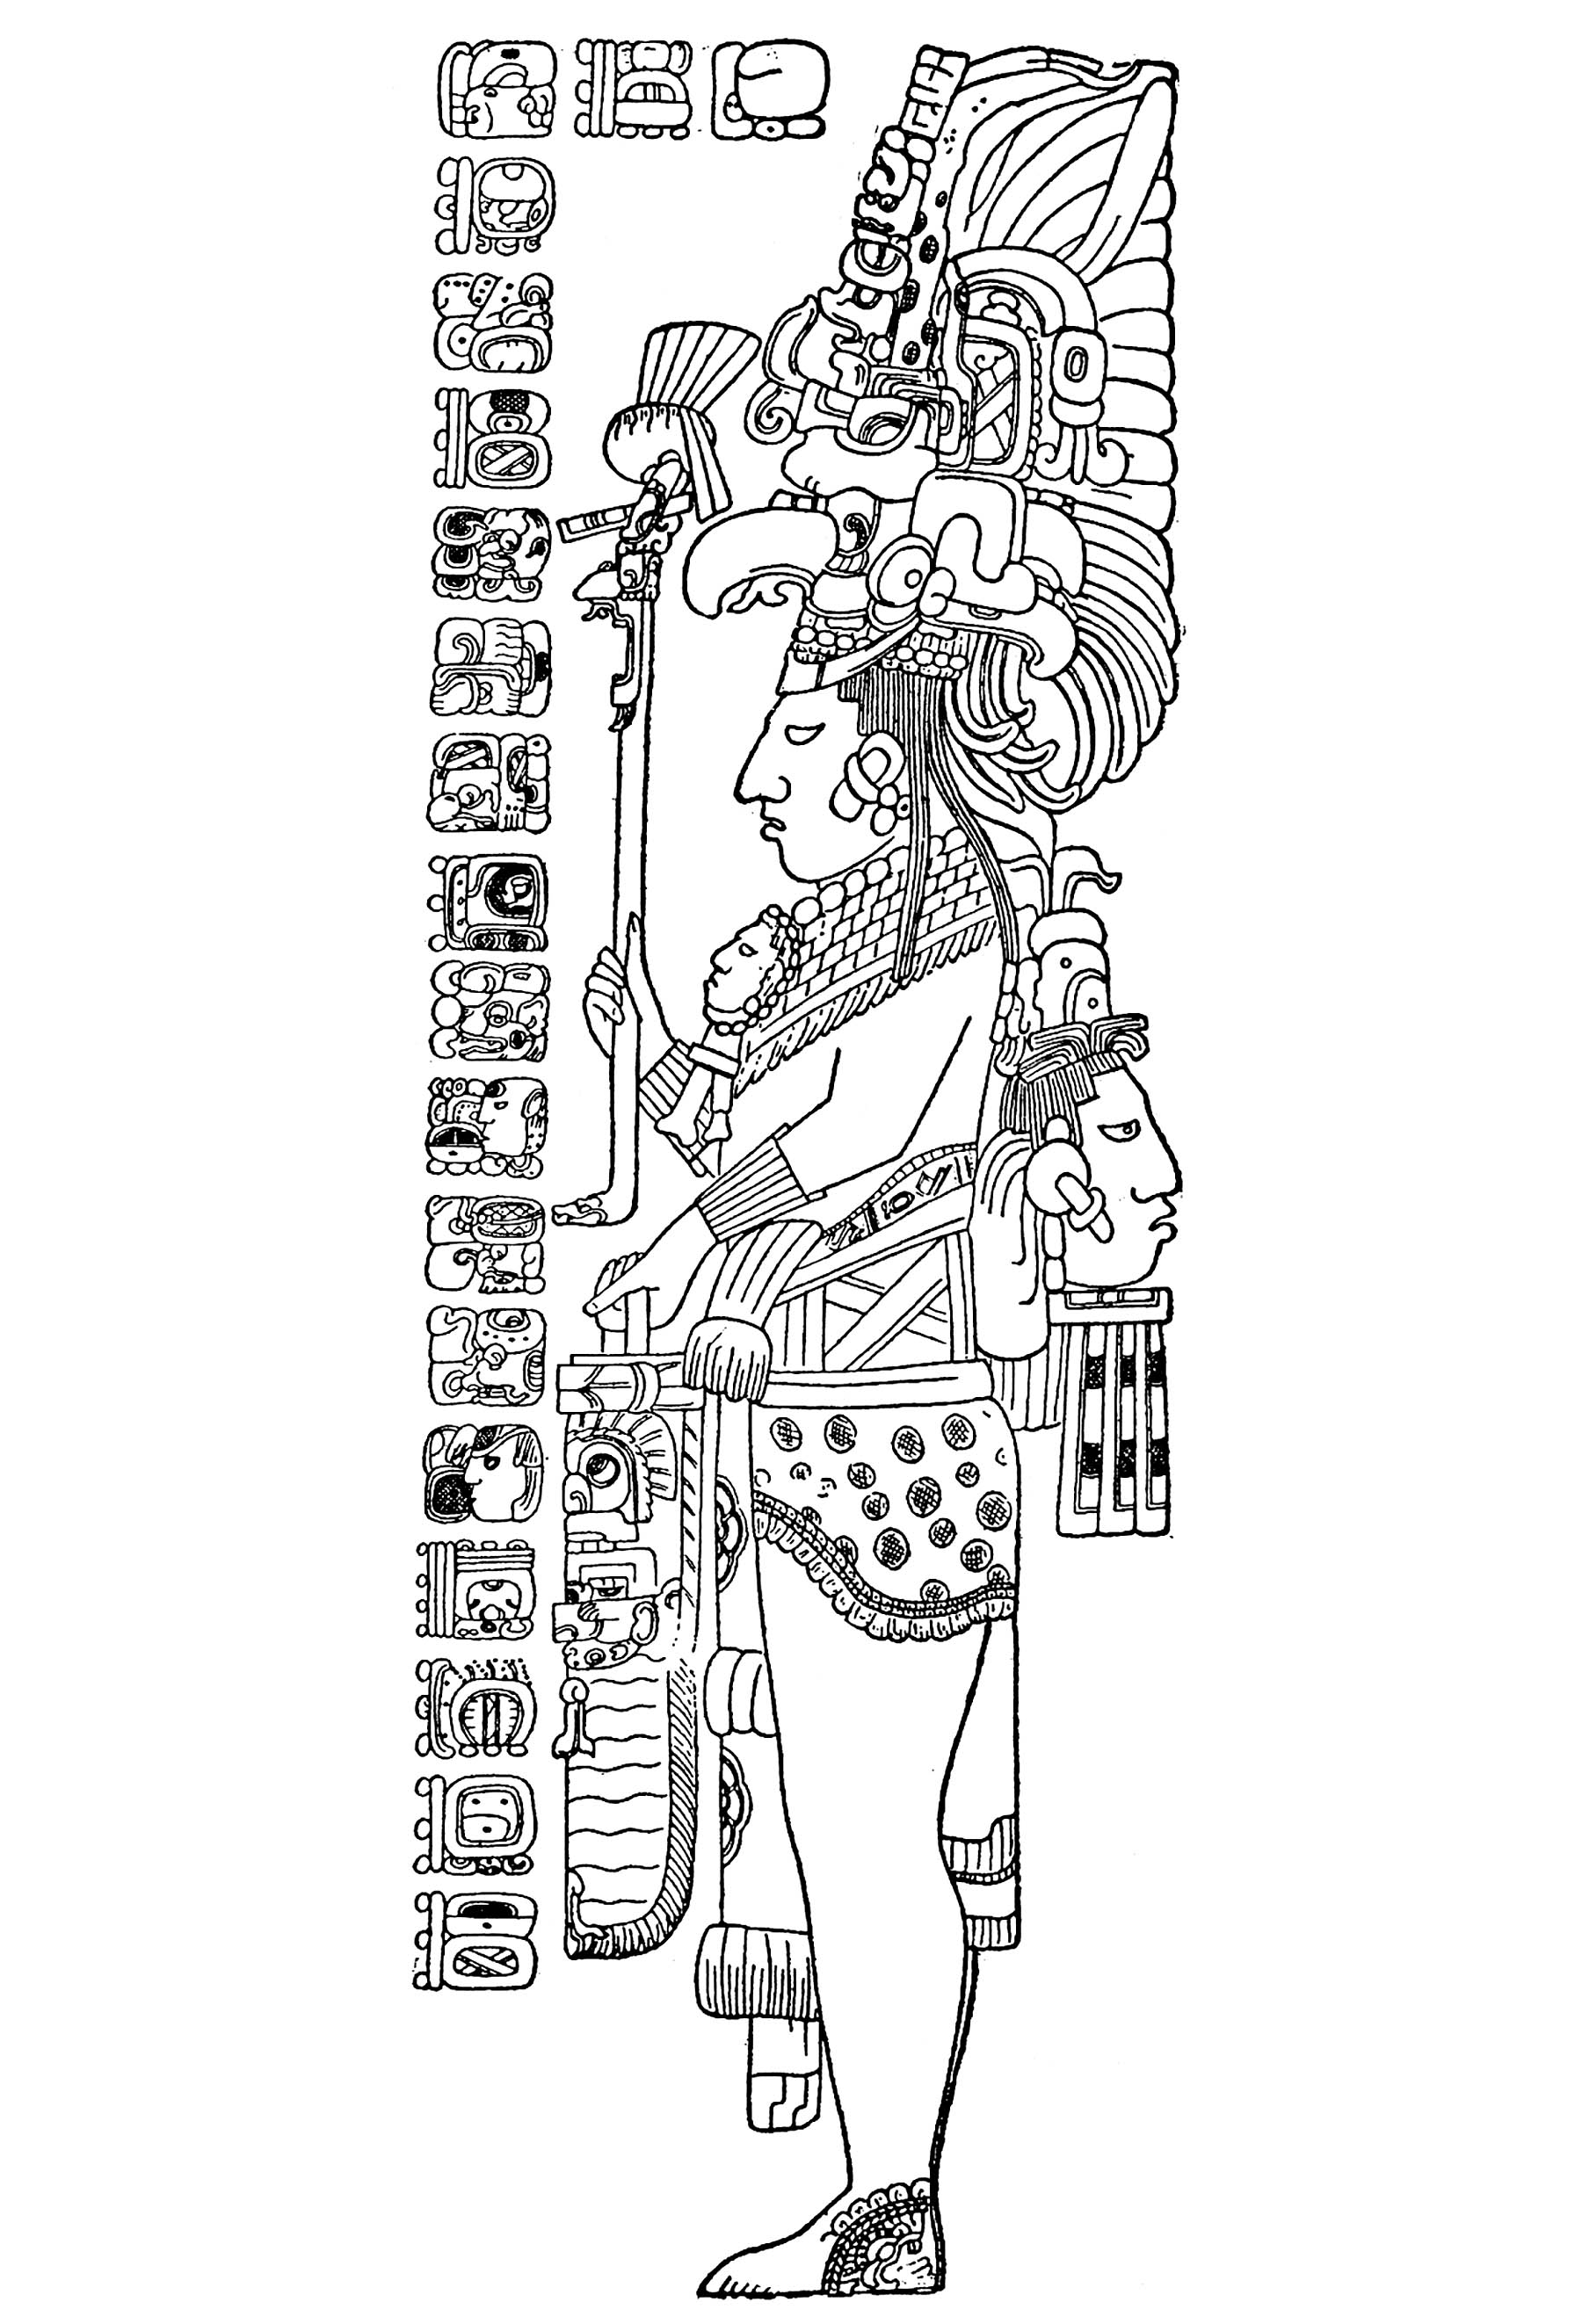 Drawing published by Herbert Spinden in his 1913 A Study of Maya Art, based on Tozzer’s original field sketches : The Tzendales stela